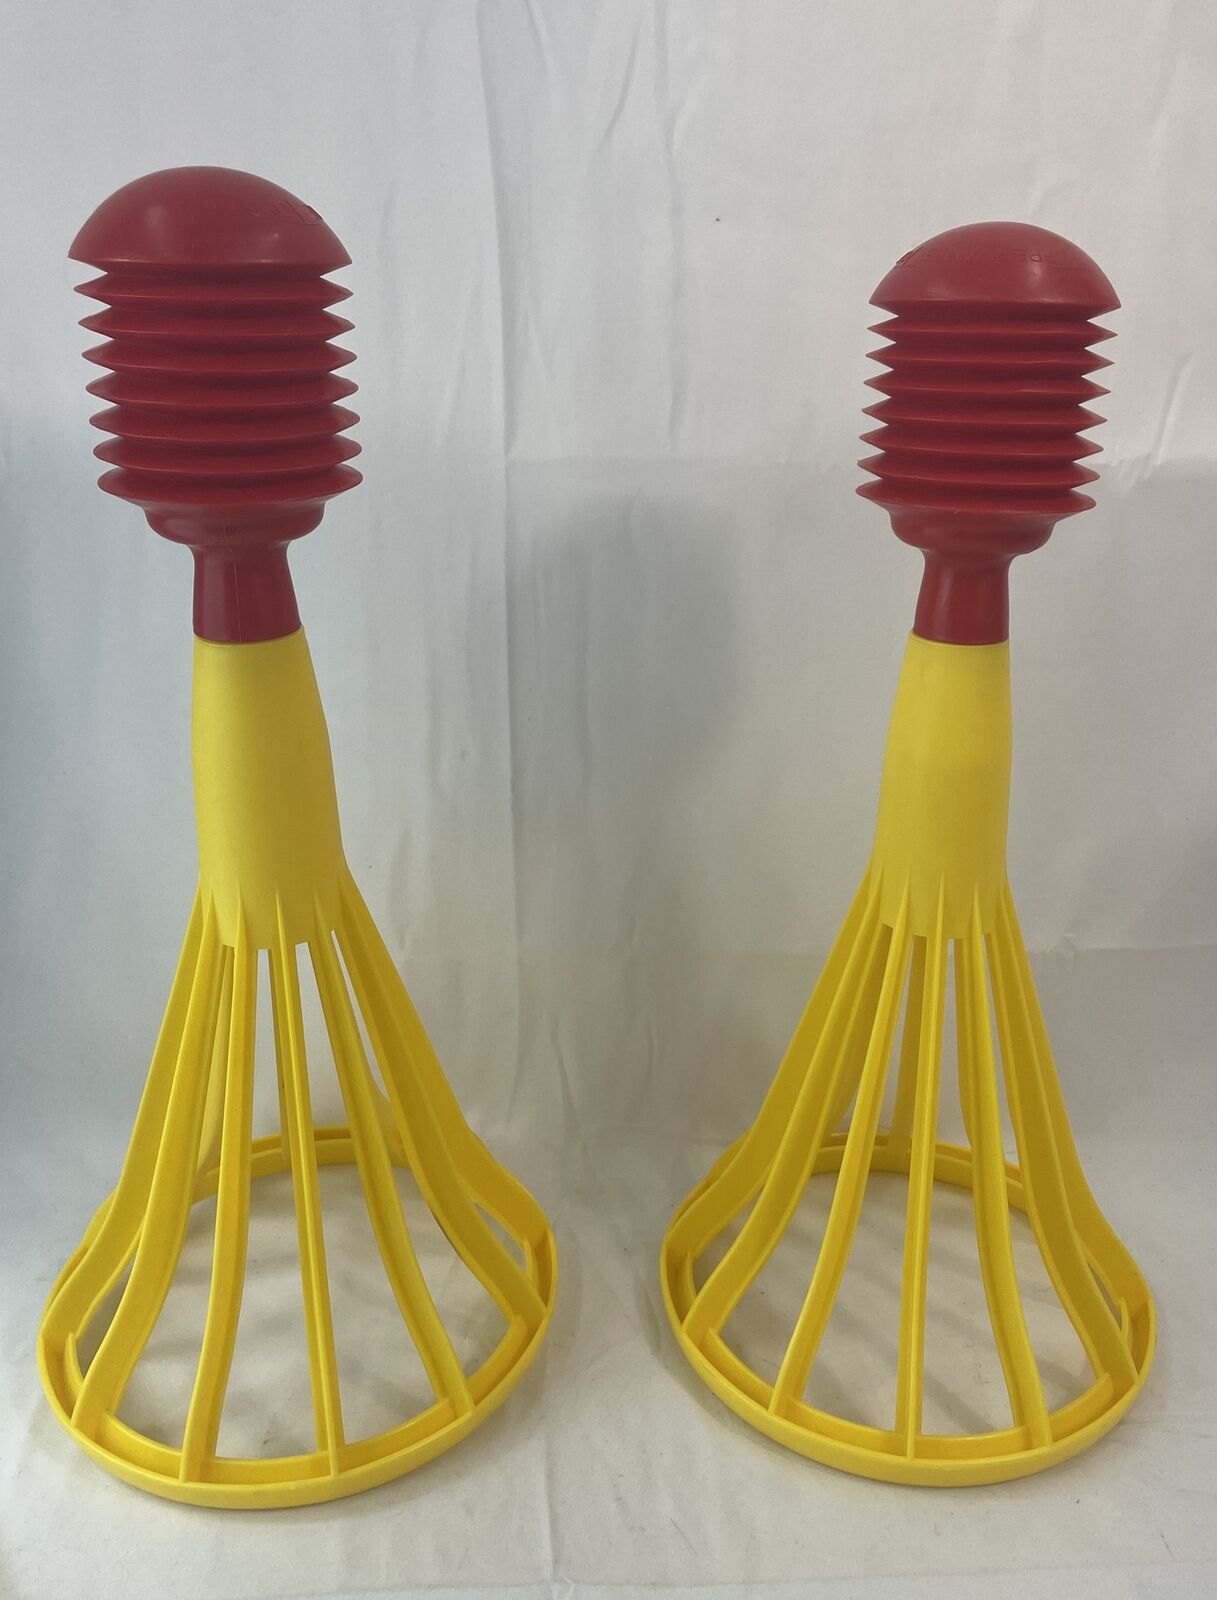 Vintage 1970s Yellow and Red Plastic Pop A Lot Tupperware Toy Set of 2